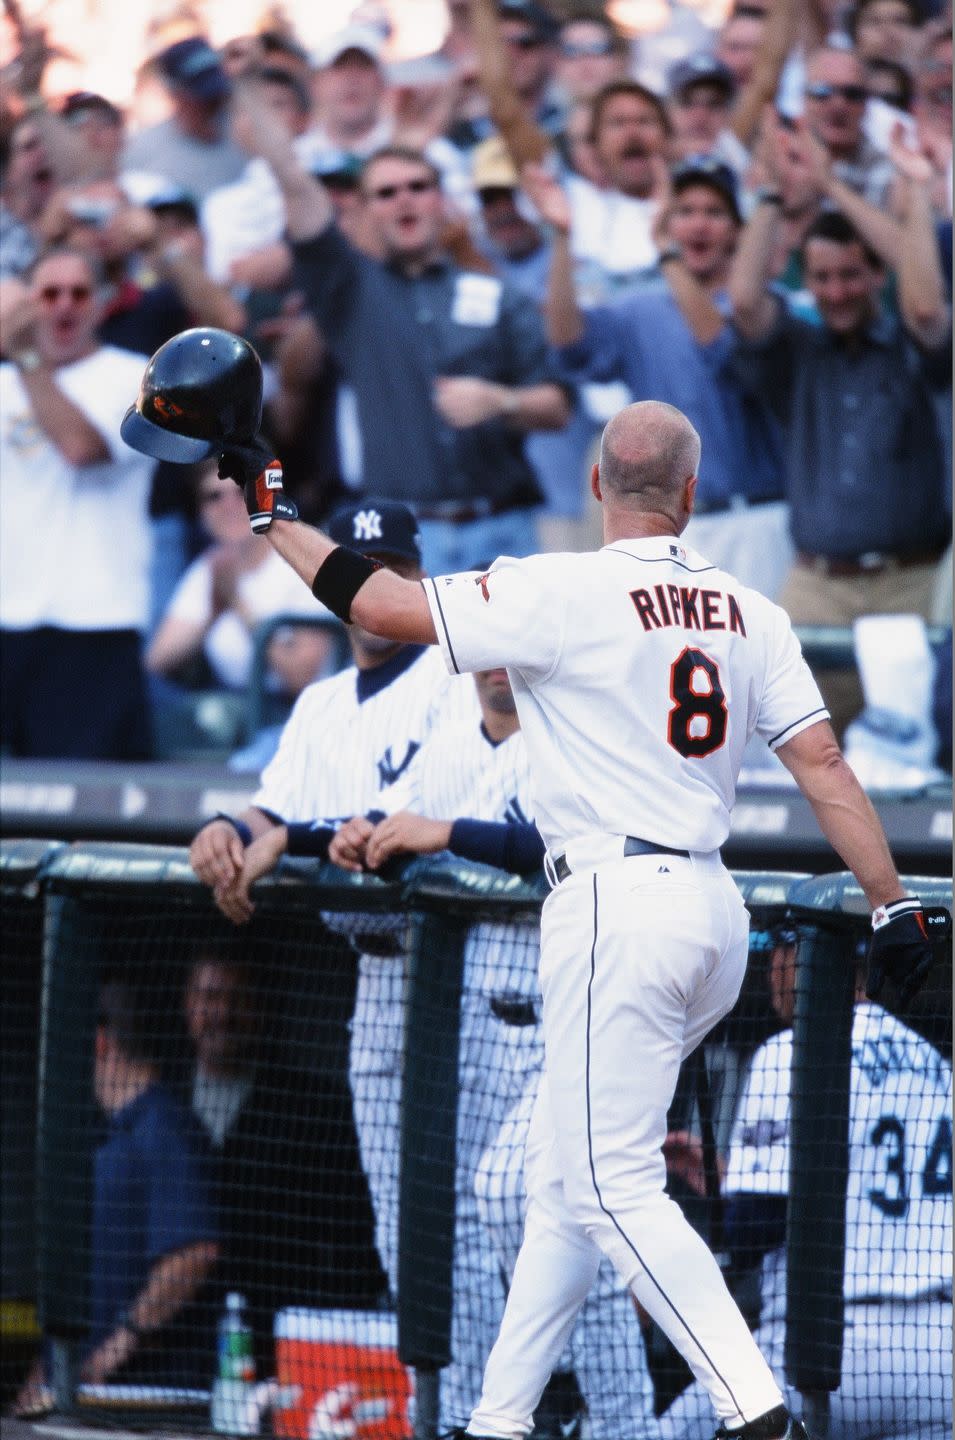 <p><strong>July 10, 2001</strong>: In addition to being baseball's all-time Iron Man, Cal Ripken could rise to the occasion. Case in point: He homered in the game he matched Lou Gehrig's 2,131-consecutive-games-played record, and again the next day when he broke it. So it was no surprise that he would deliver a great moment in his final All-Star Game in 2001.<br><br>Ripken, a landslide selection to start at third base for the American League, came to the plate in the third inning to the theme from the movie, <em>The Natural</em>. He received a warm ovation, so affectionate and long that he had to step out of the batter's box and acknowledge it.<br><br>When he steps back in, Dodgers pitcher Chan Ho Park delivers the first pitch...and Ripken sends it over the fence in left field. He becomes the oldest player (40 years, 10 months, 16 days) to hit a home run in the All-Star Game, eclipsing Stan Musial, and is named the Game's MVP for a record second time.<br><br>"As far as special moments go, it doesn't get any better than that," says fellow all-star and 2001 retiree Tony Gwynn.<br> </p>